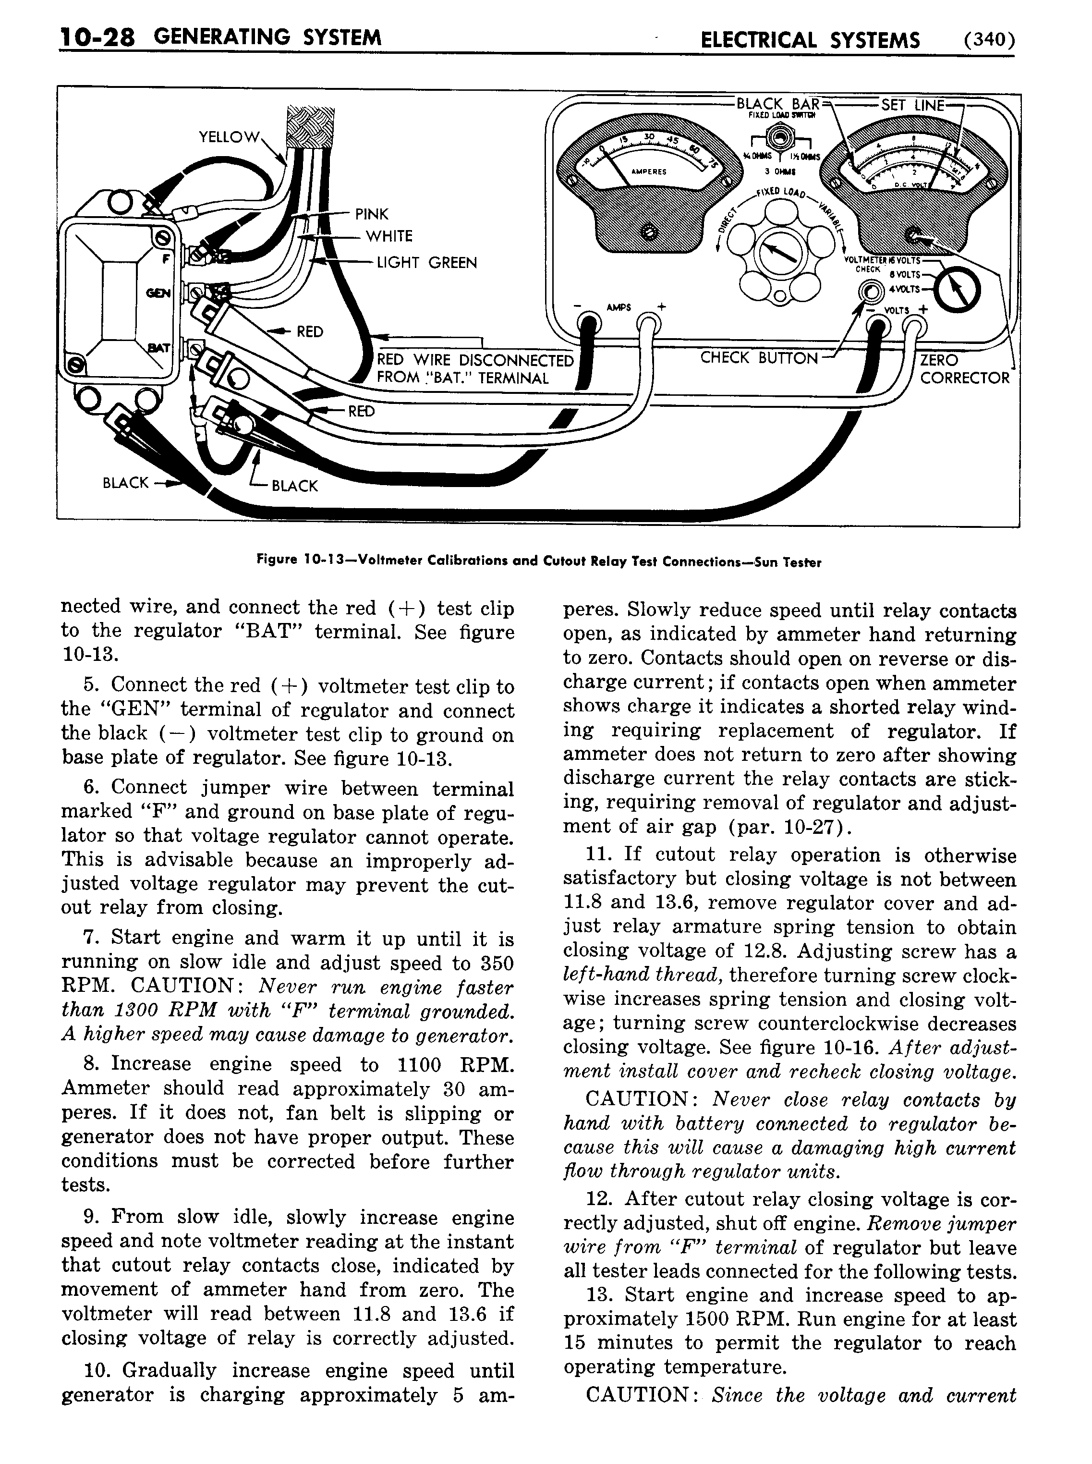 n_11 1954 Buick Shop Manual - Electrical Systems-028-028.jpg